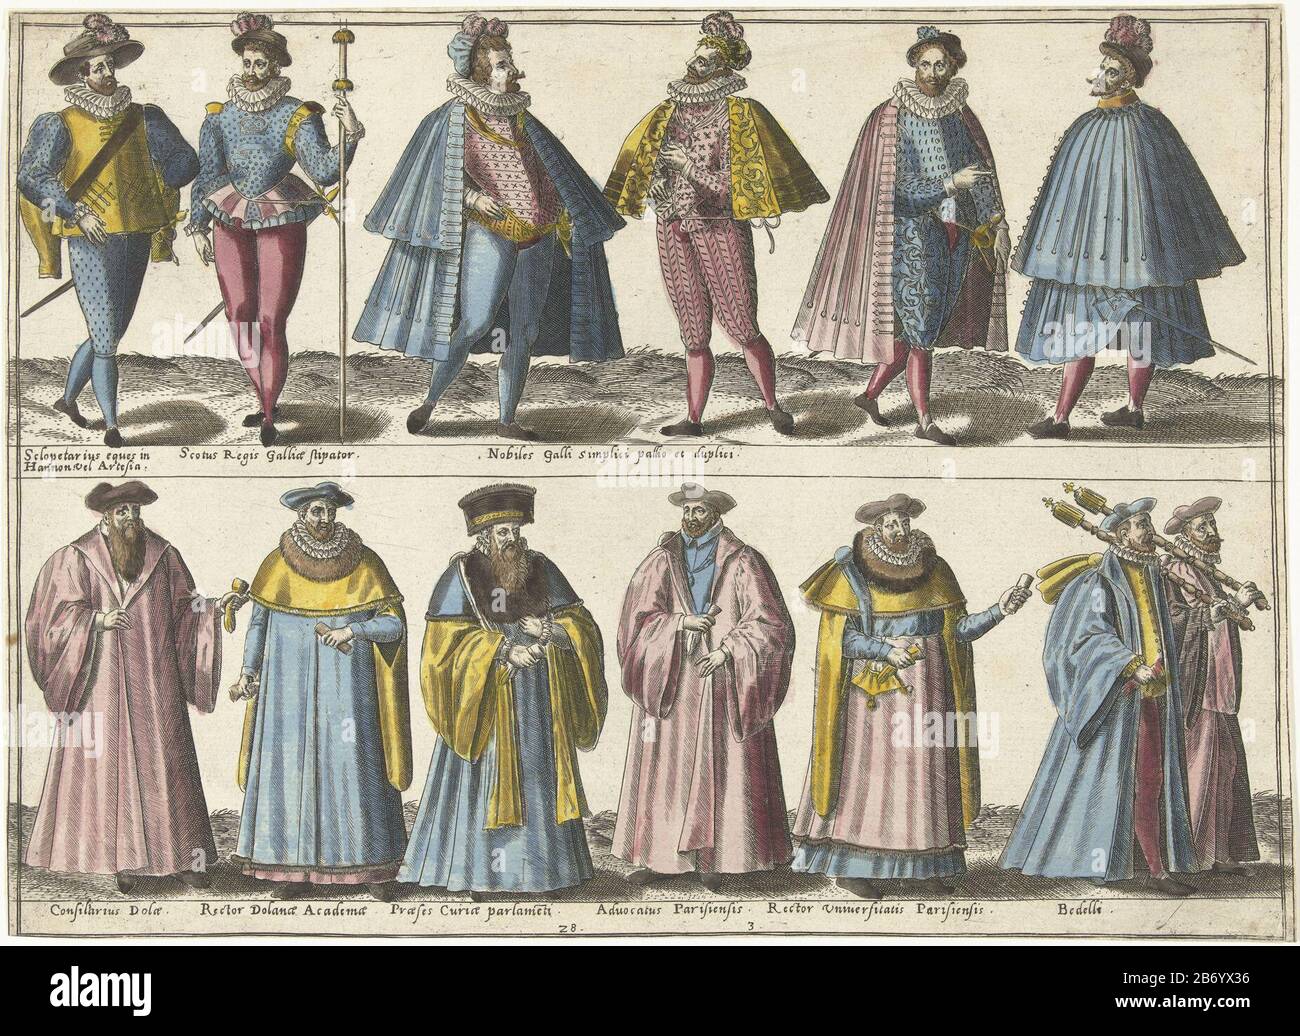 Kleding van verschillende standen volgens de Franse mode rond 1580 Print  out of a book on clothing around 1580. In two rows one above the other  imaged apparel. In the top row